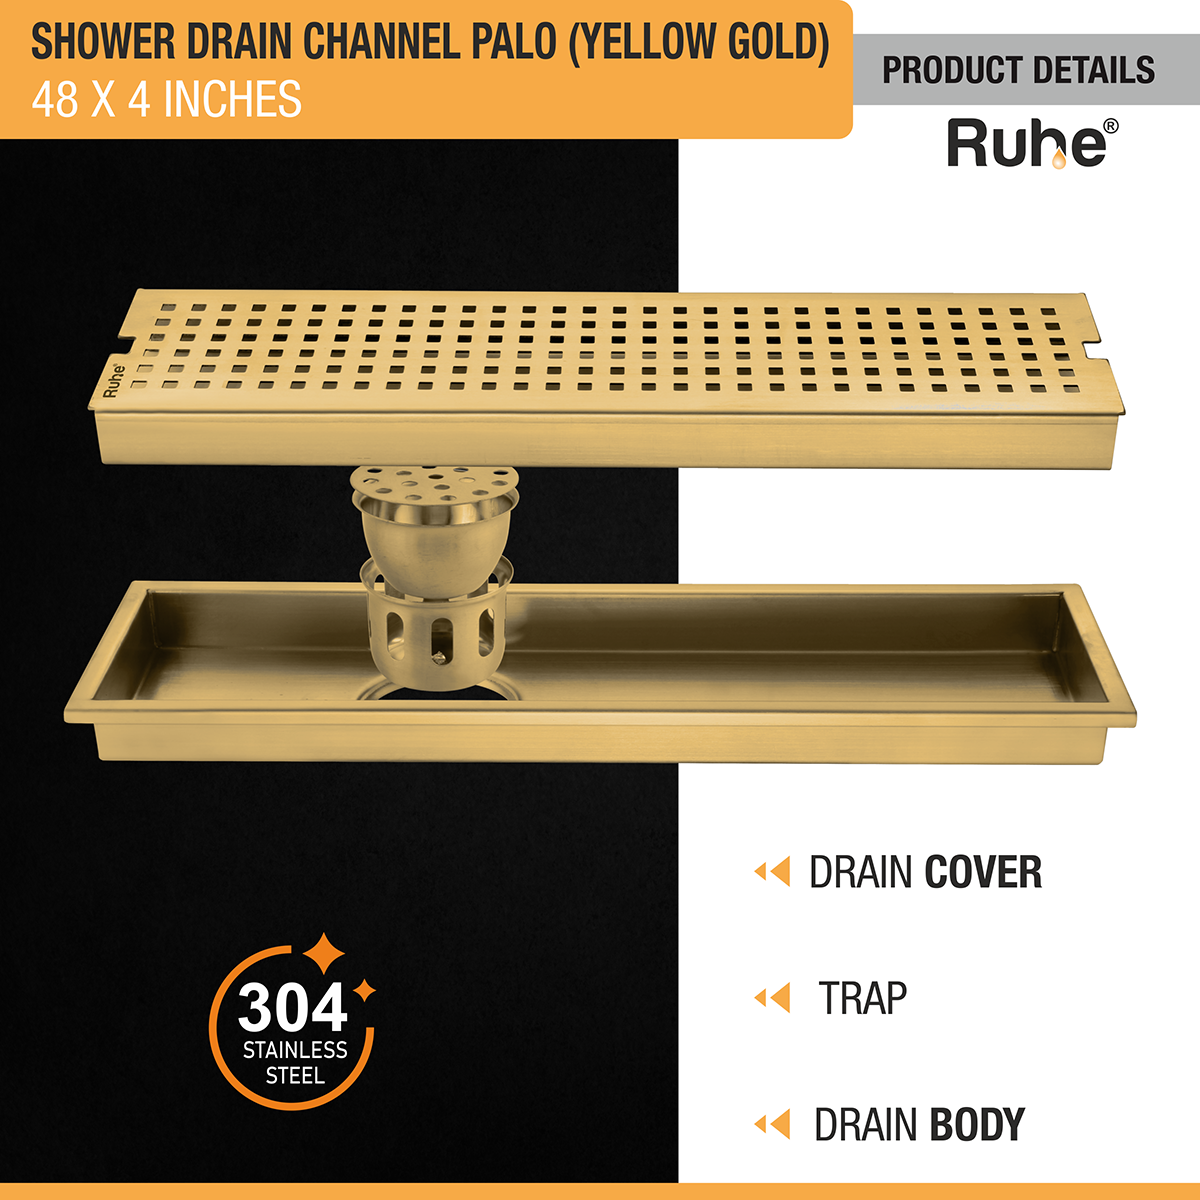 Palo Shower Drain Channel (48 x 4 Inches) YELLOW GOLD product details